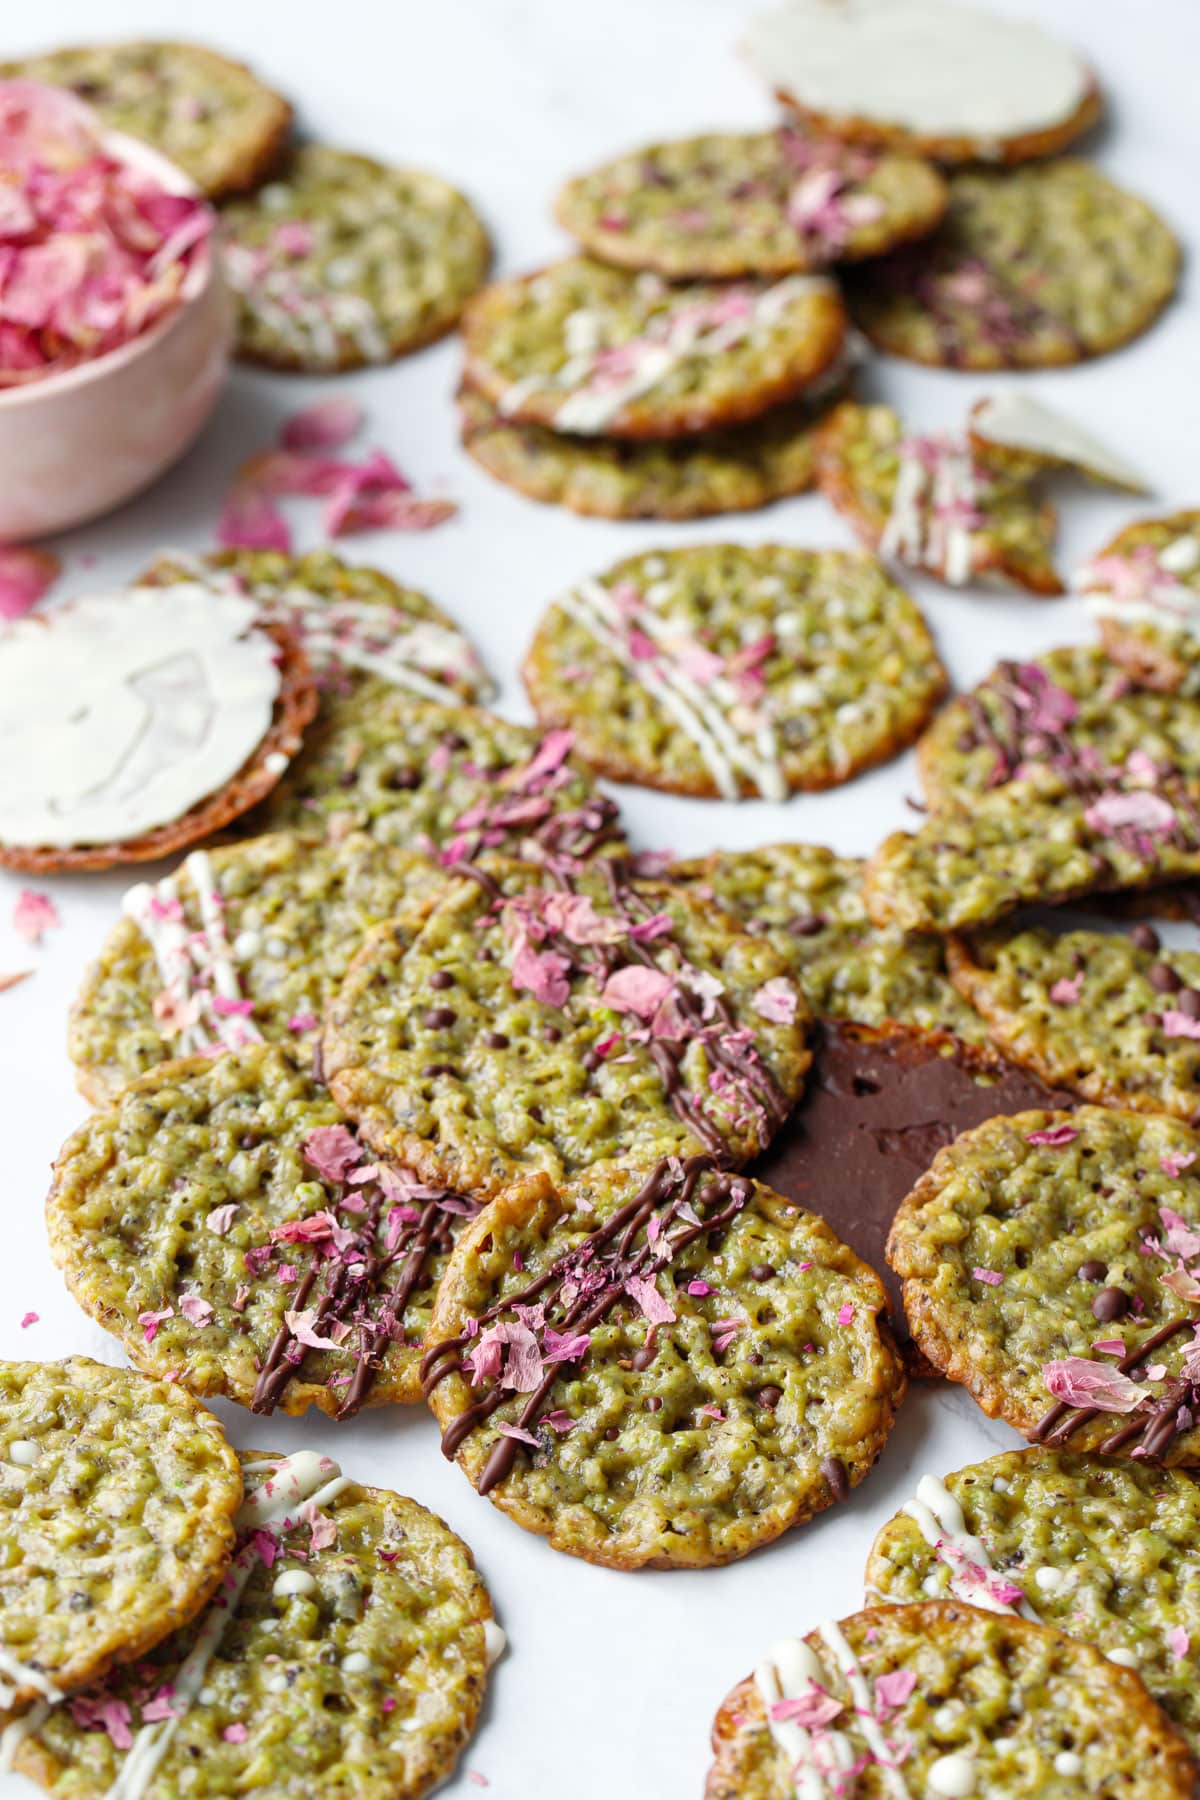 Messy arrangement of Pistachio Florentine Cookies, some with white chocolate drizzles and some with dark, topped with dried rose petals.